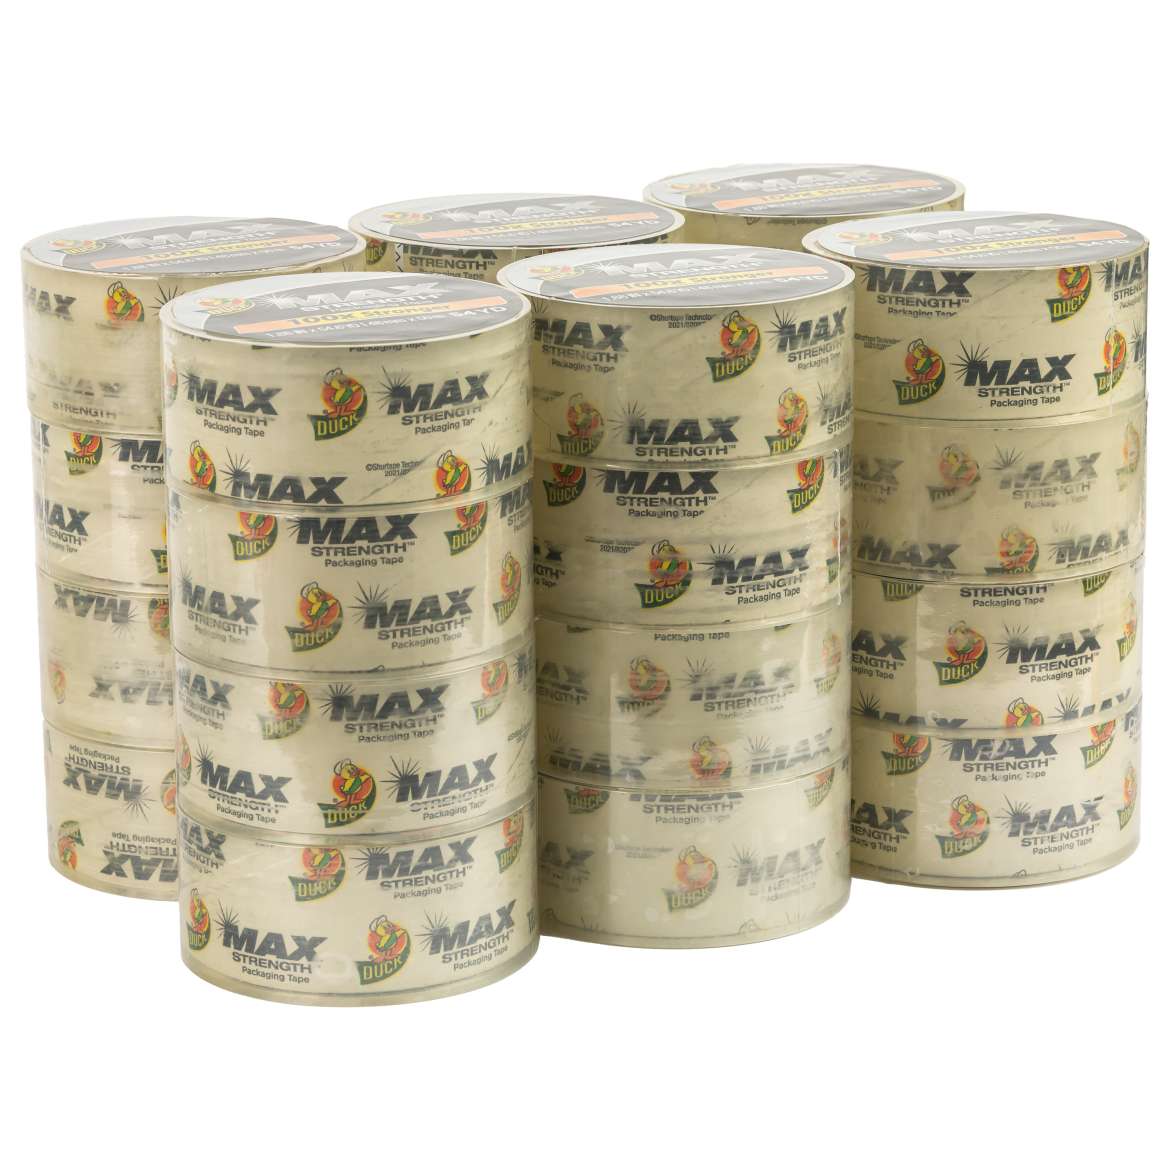 Duck Max Strength® Packing Tape Image